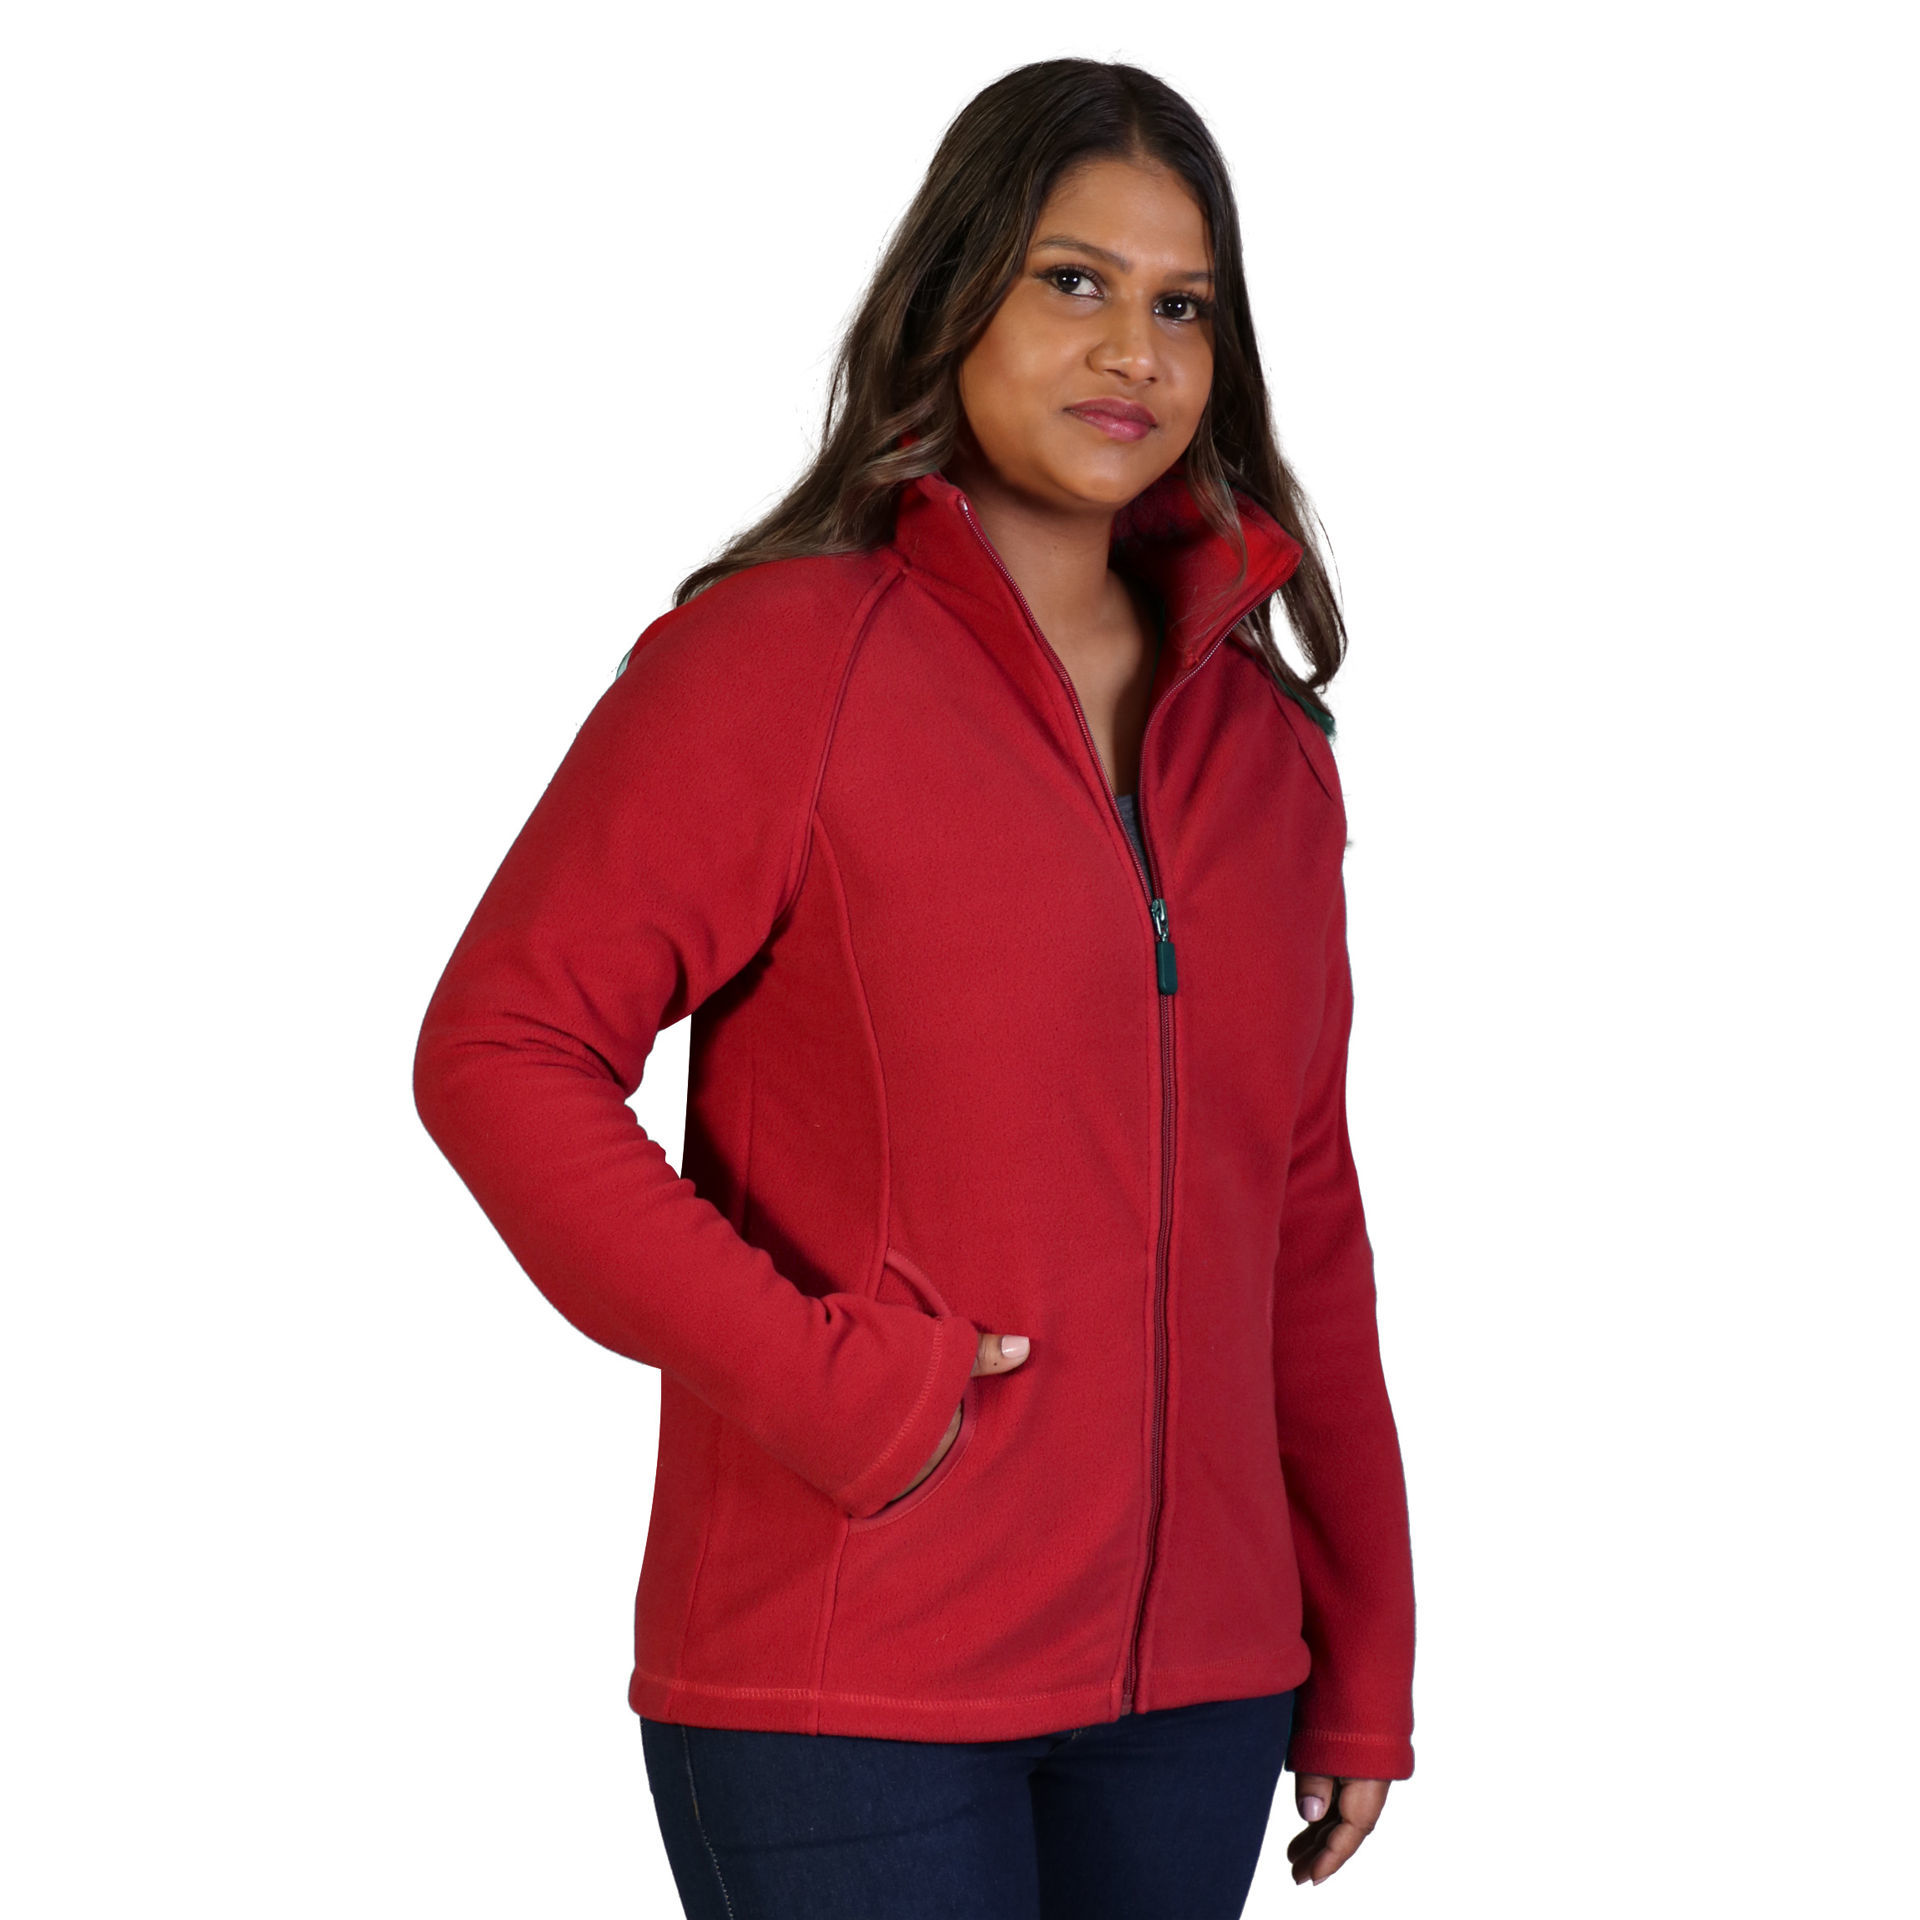 Fleece jacket, polyester fabric, density 280 G, with a pocket on